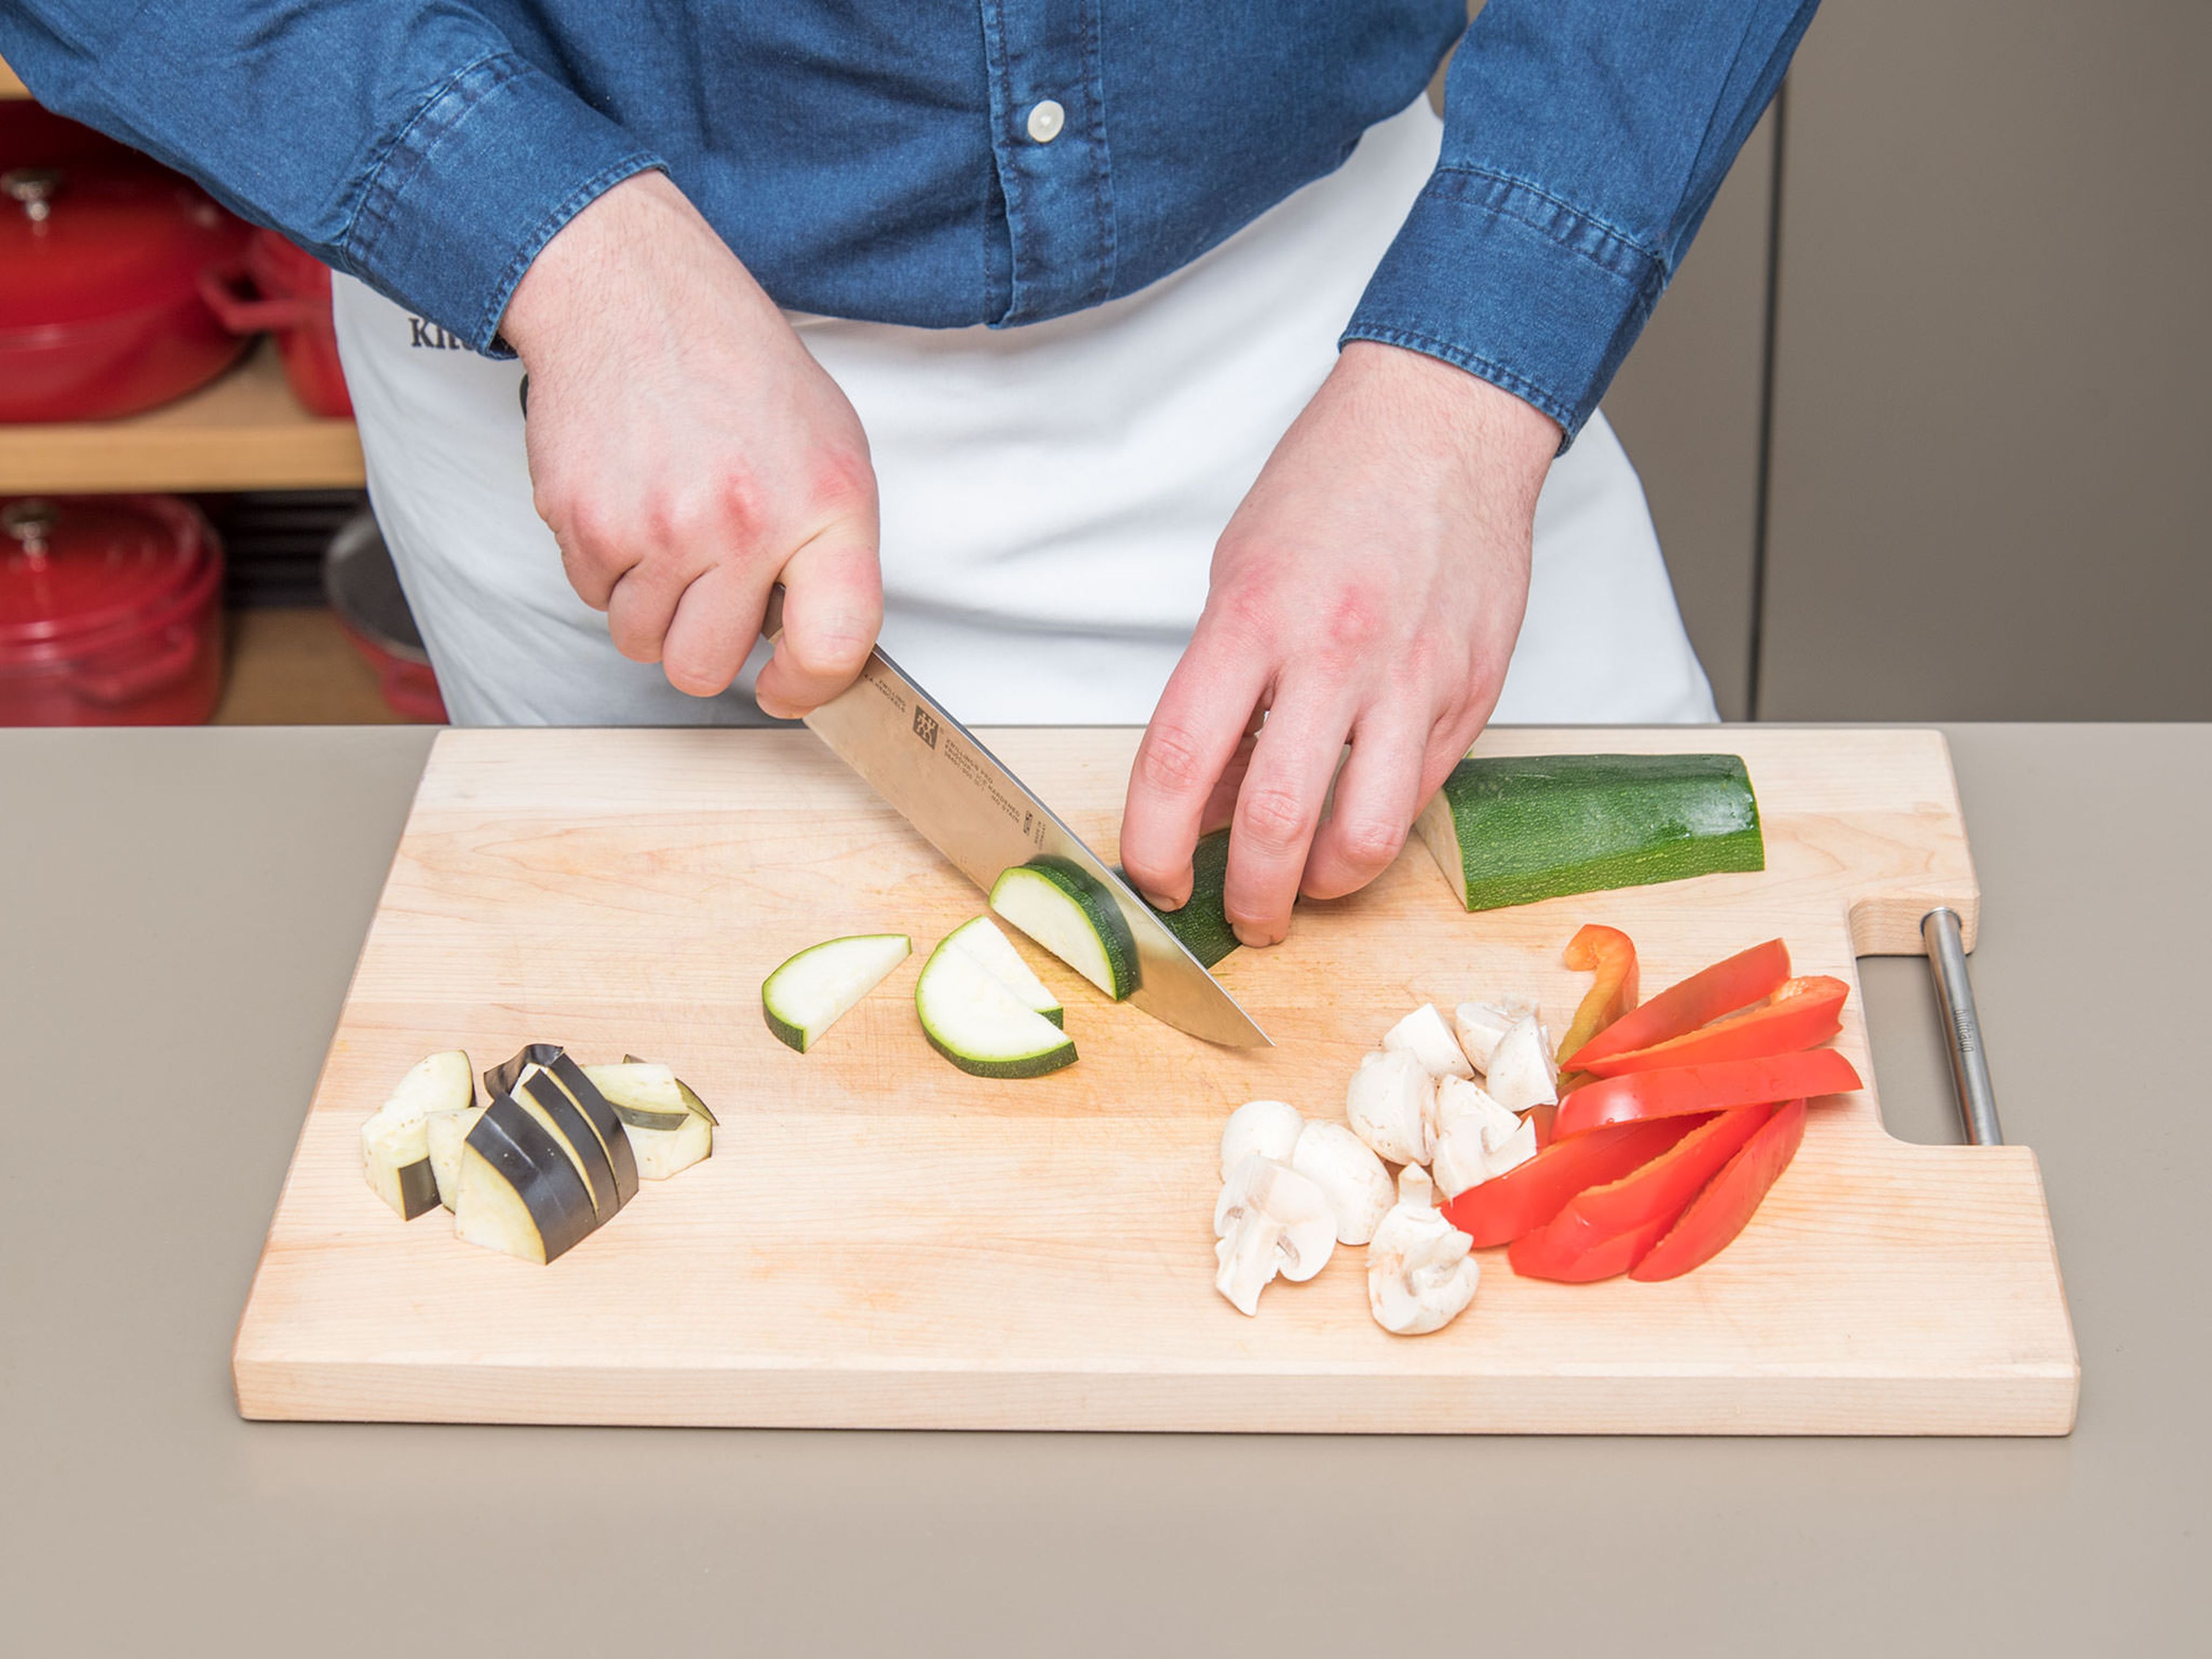 Remove the core of the bell peppers and cut into thin slices. Halve zucchini lengthwise, quarter eggplant, and halve mushrooms. Slice zucchini, eggplant, and mushrooms and transfer to a bowl.